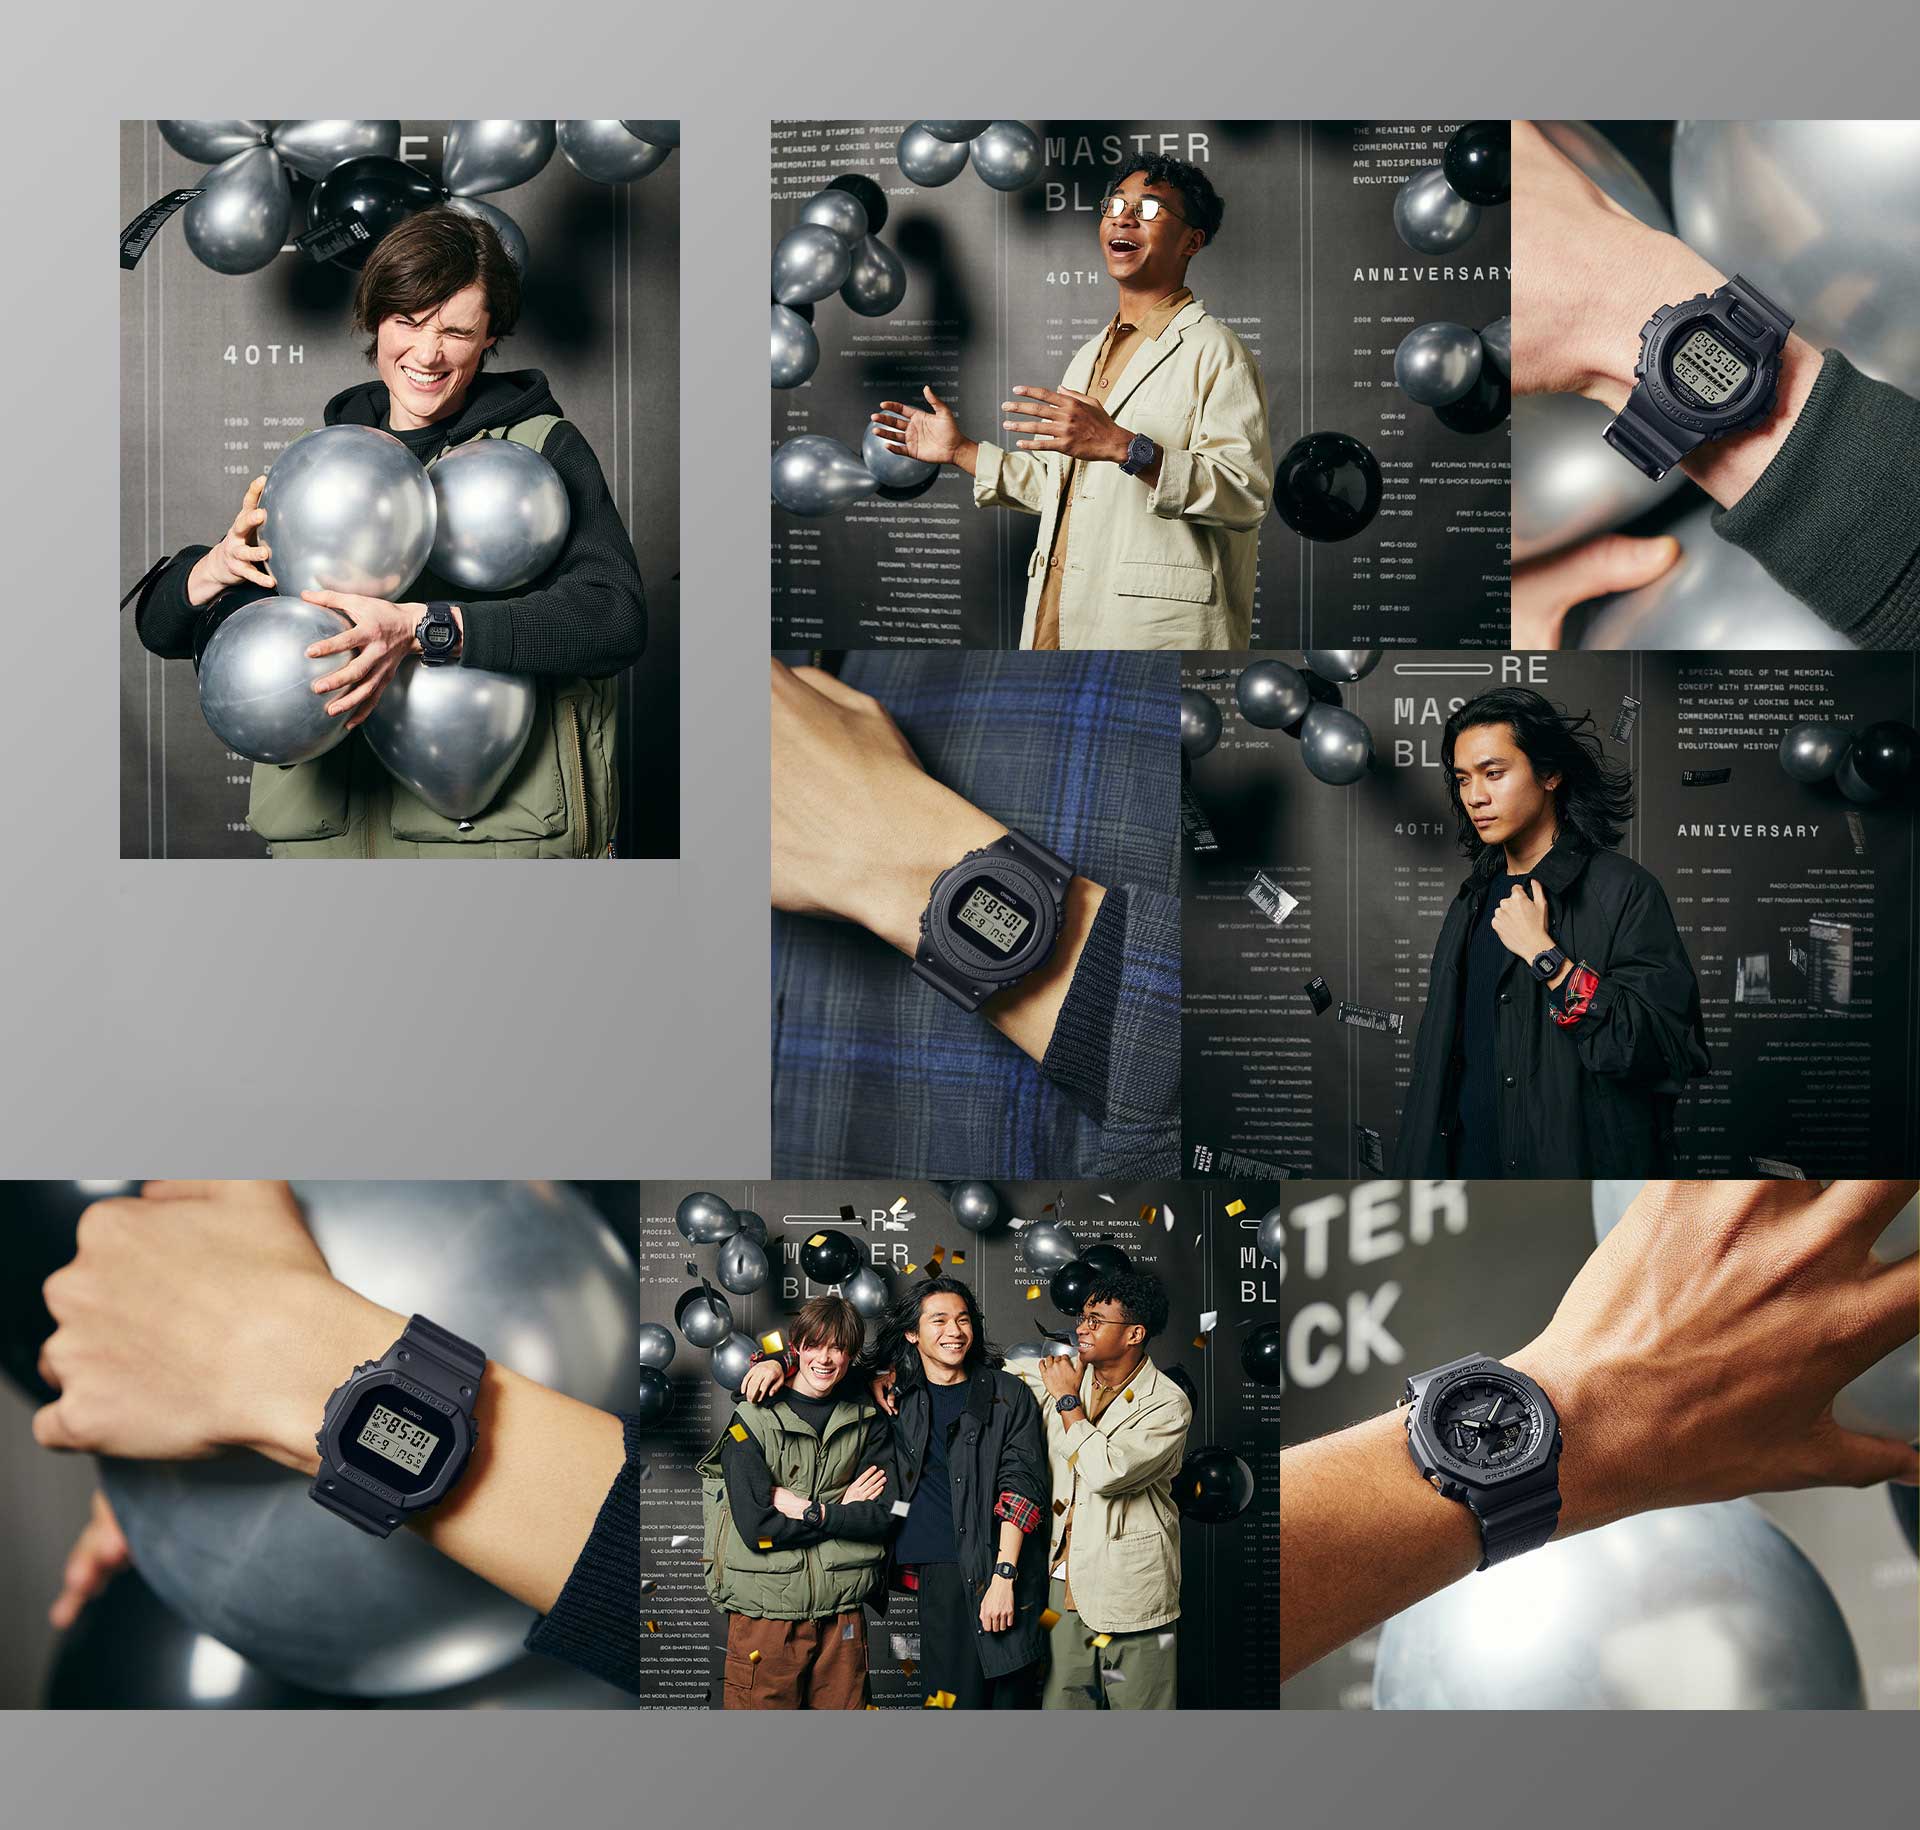 Collage of people wearing G-SHOCK watches while holding black and silver balloons